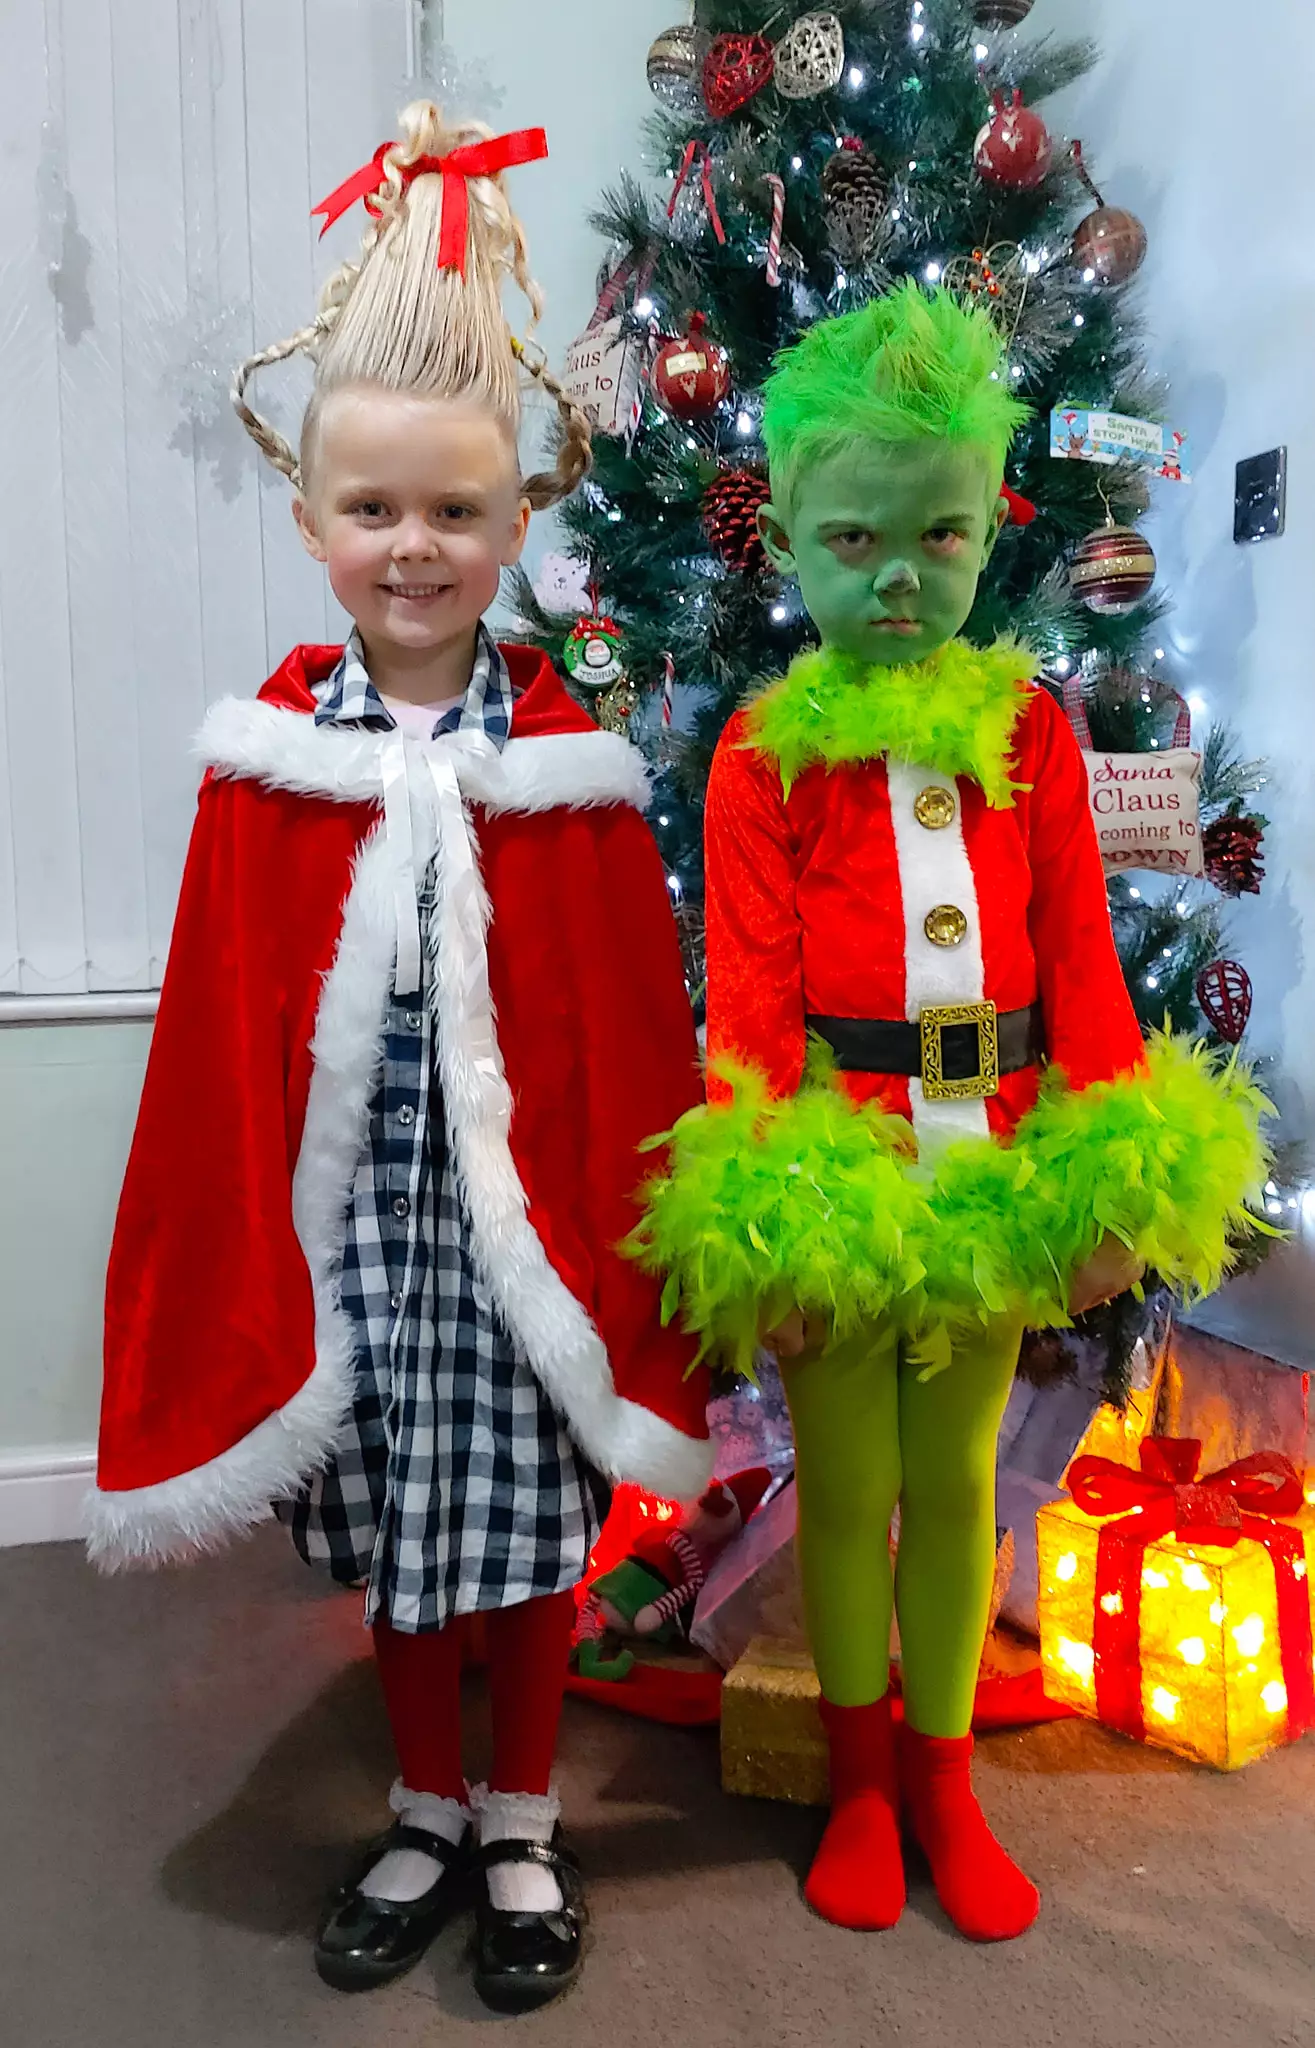 Cassie Middleton left Facebook users astounded by her 'Grinch' costumes (